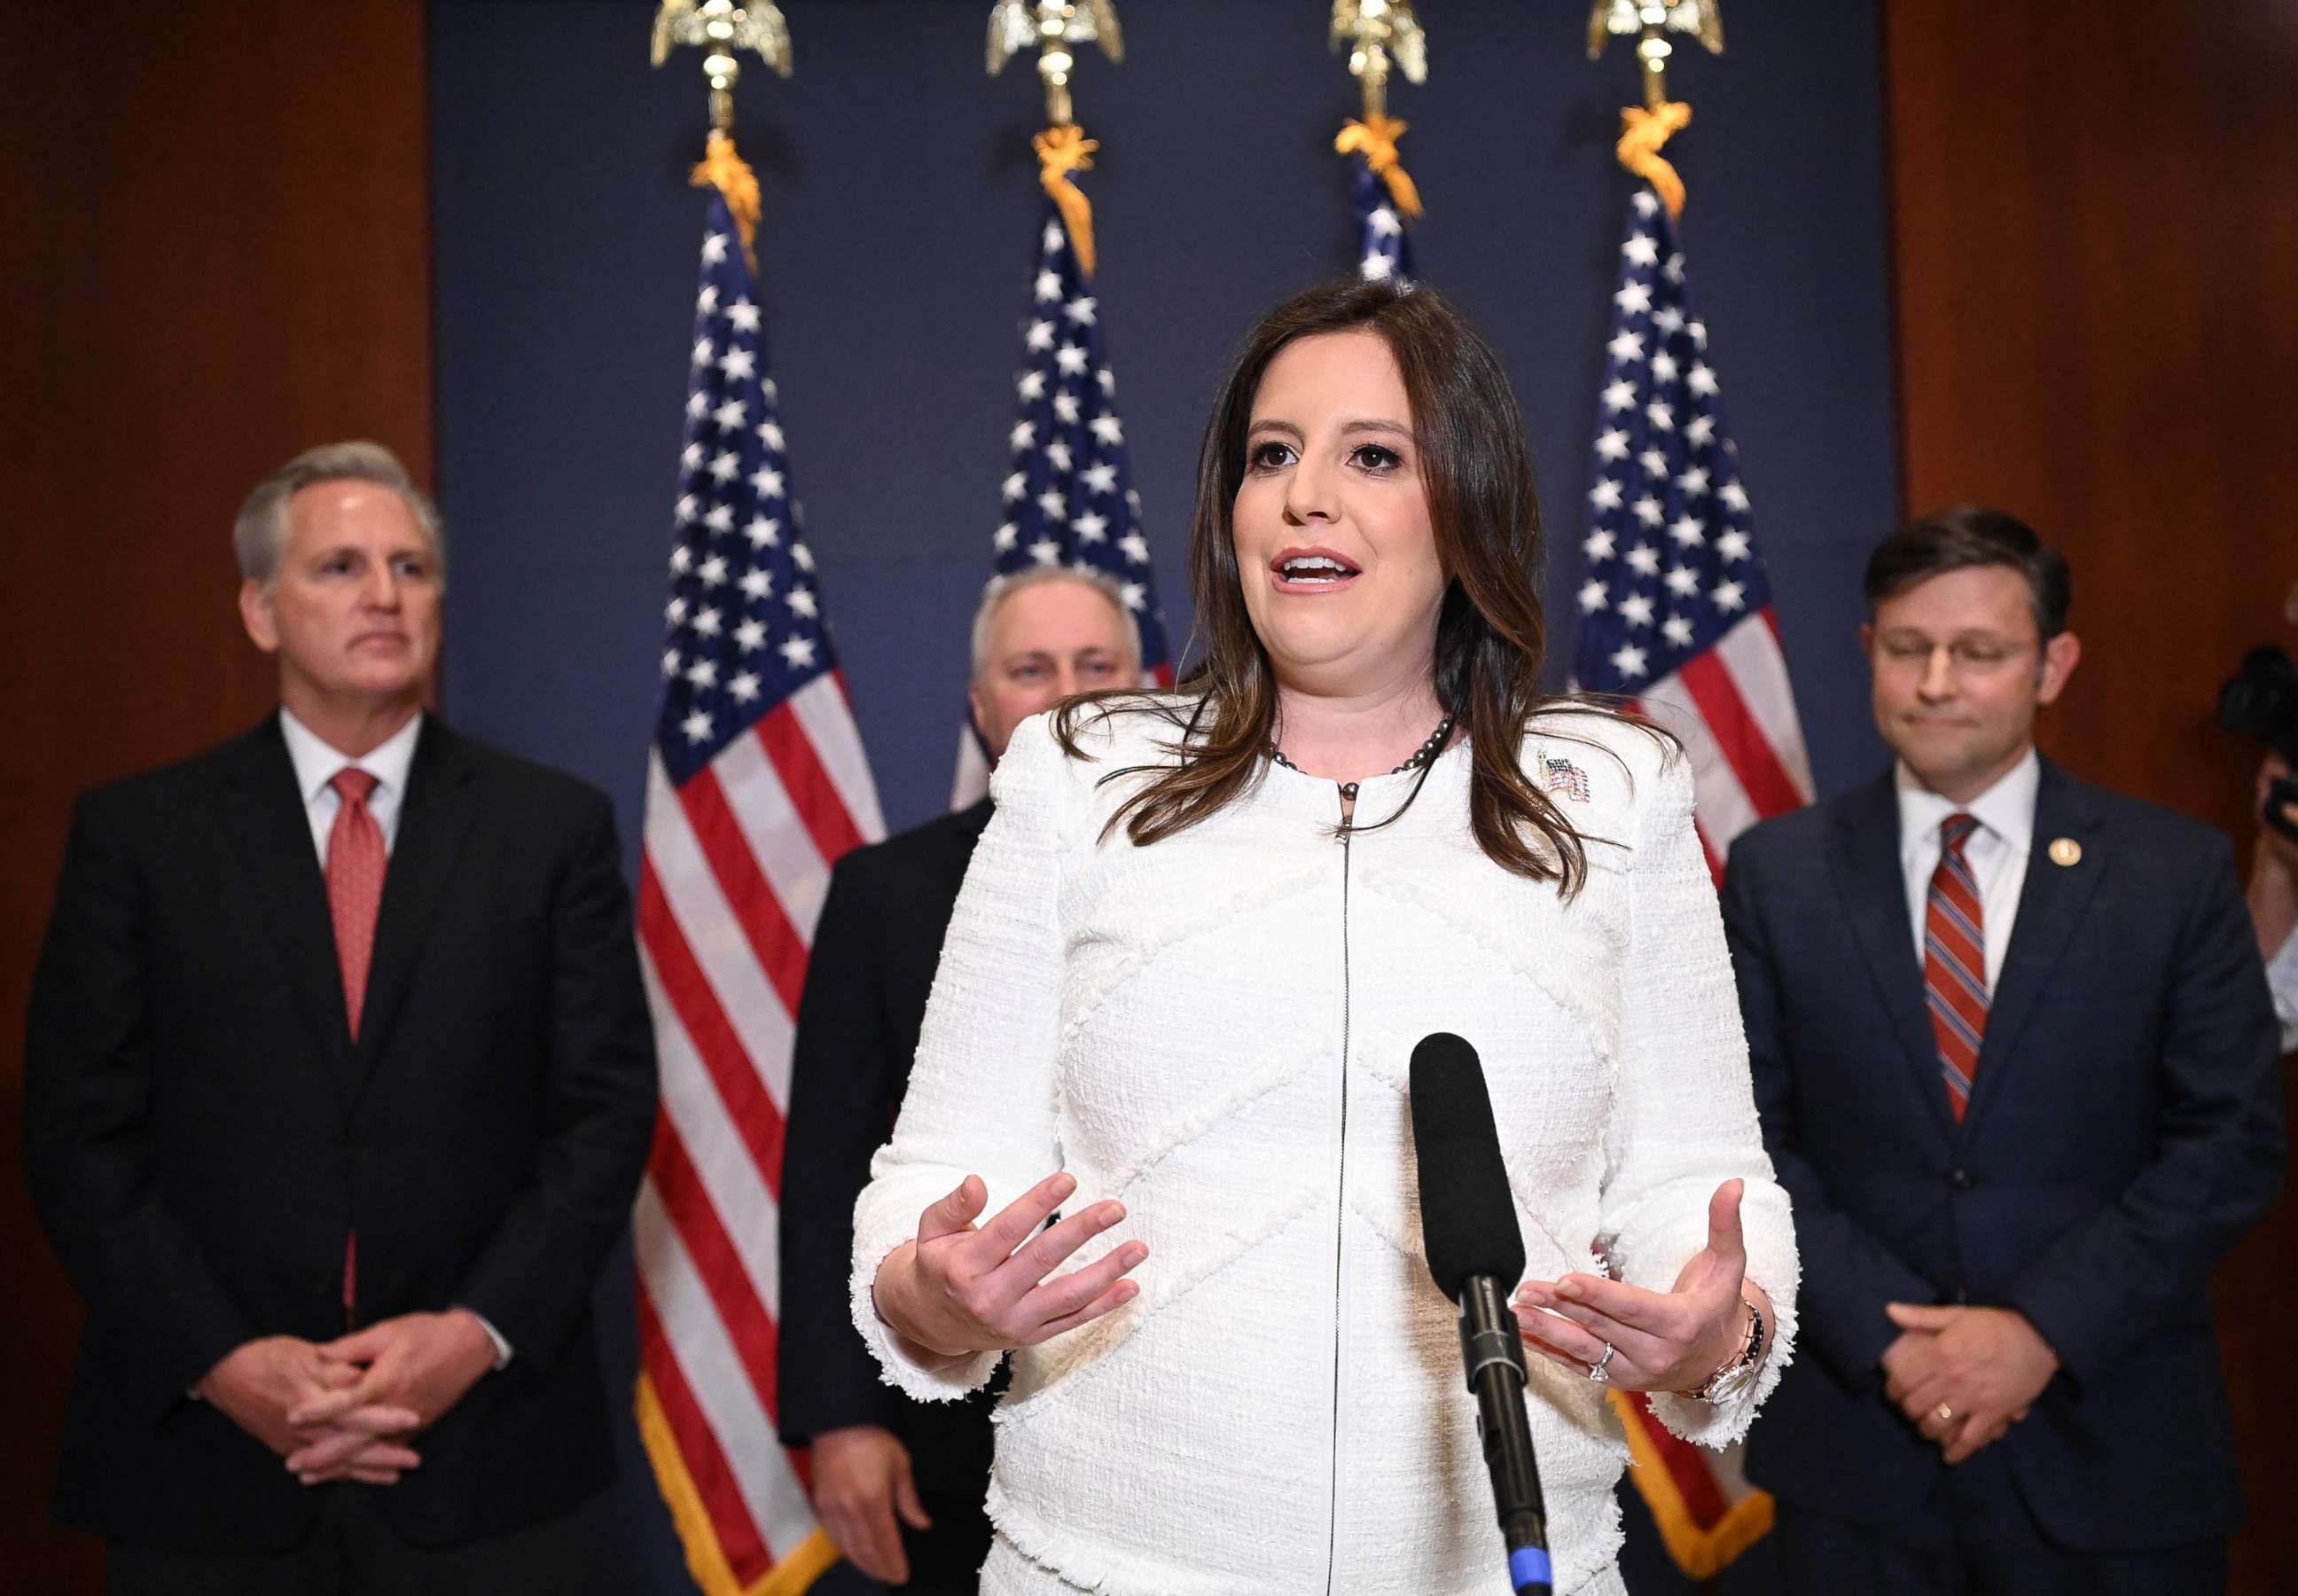 PHOTO: Rep. Elise Stefanik speaks to reporters after House Republicans voted for her as their conference chairperson at the US Capitol in Washington on May 14, 2021.